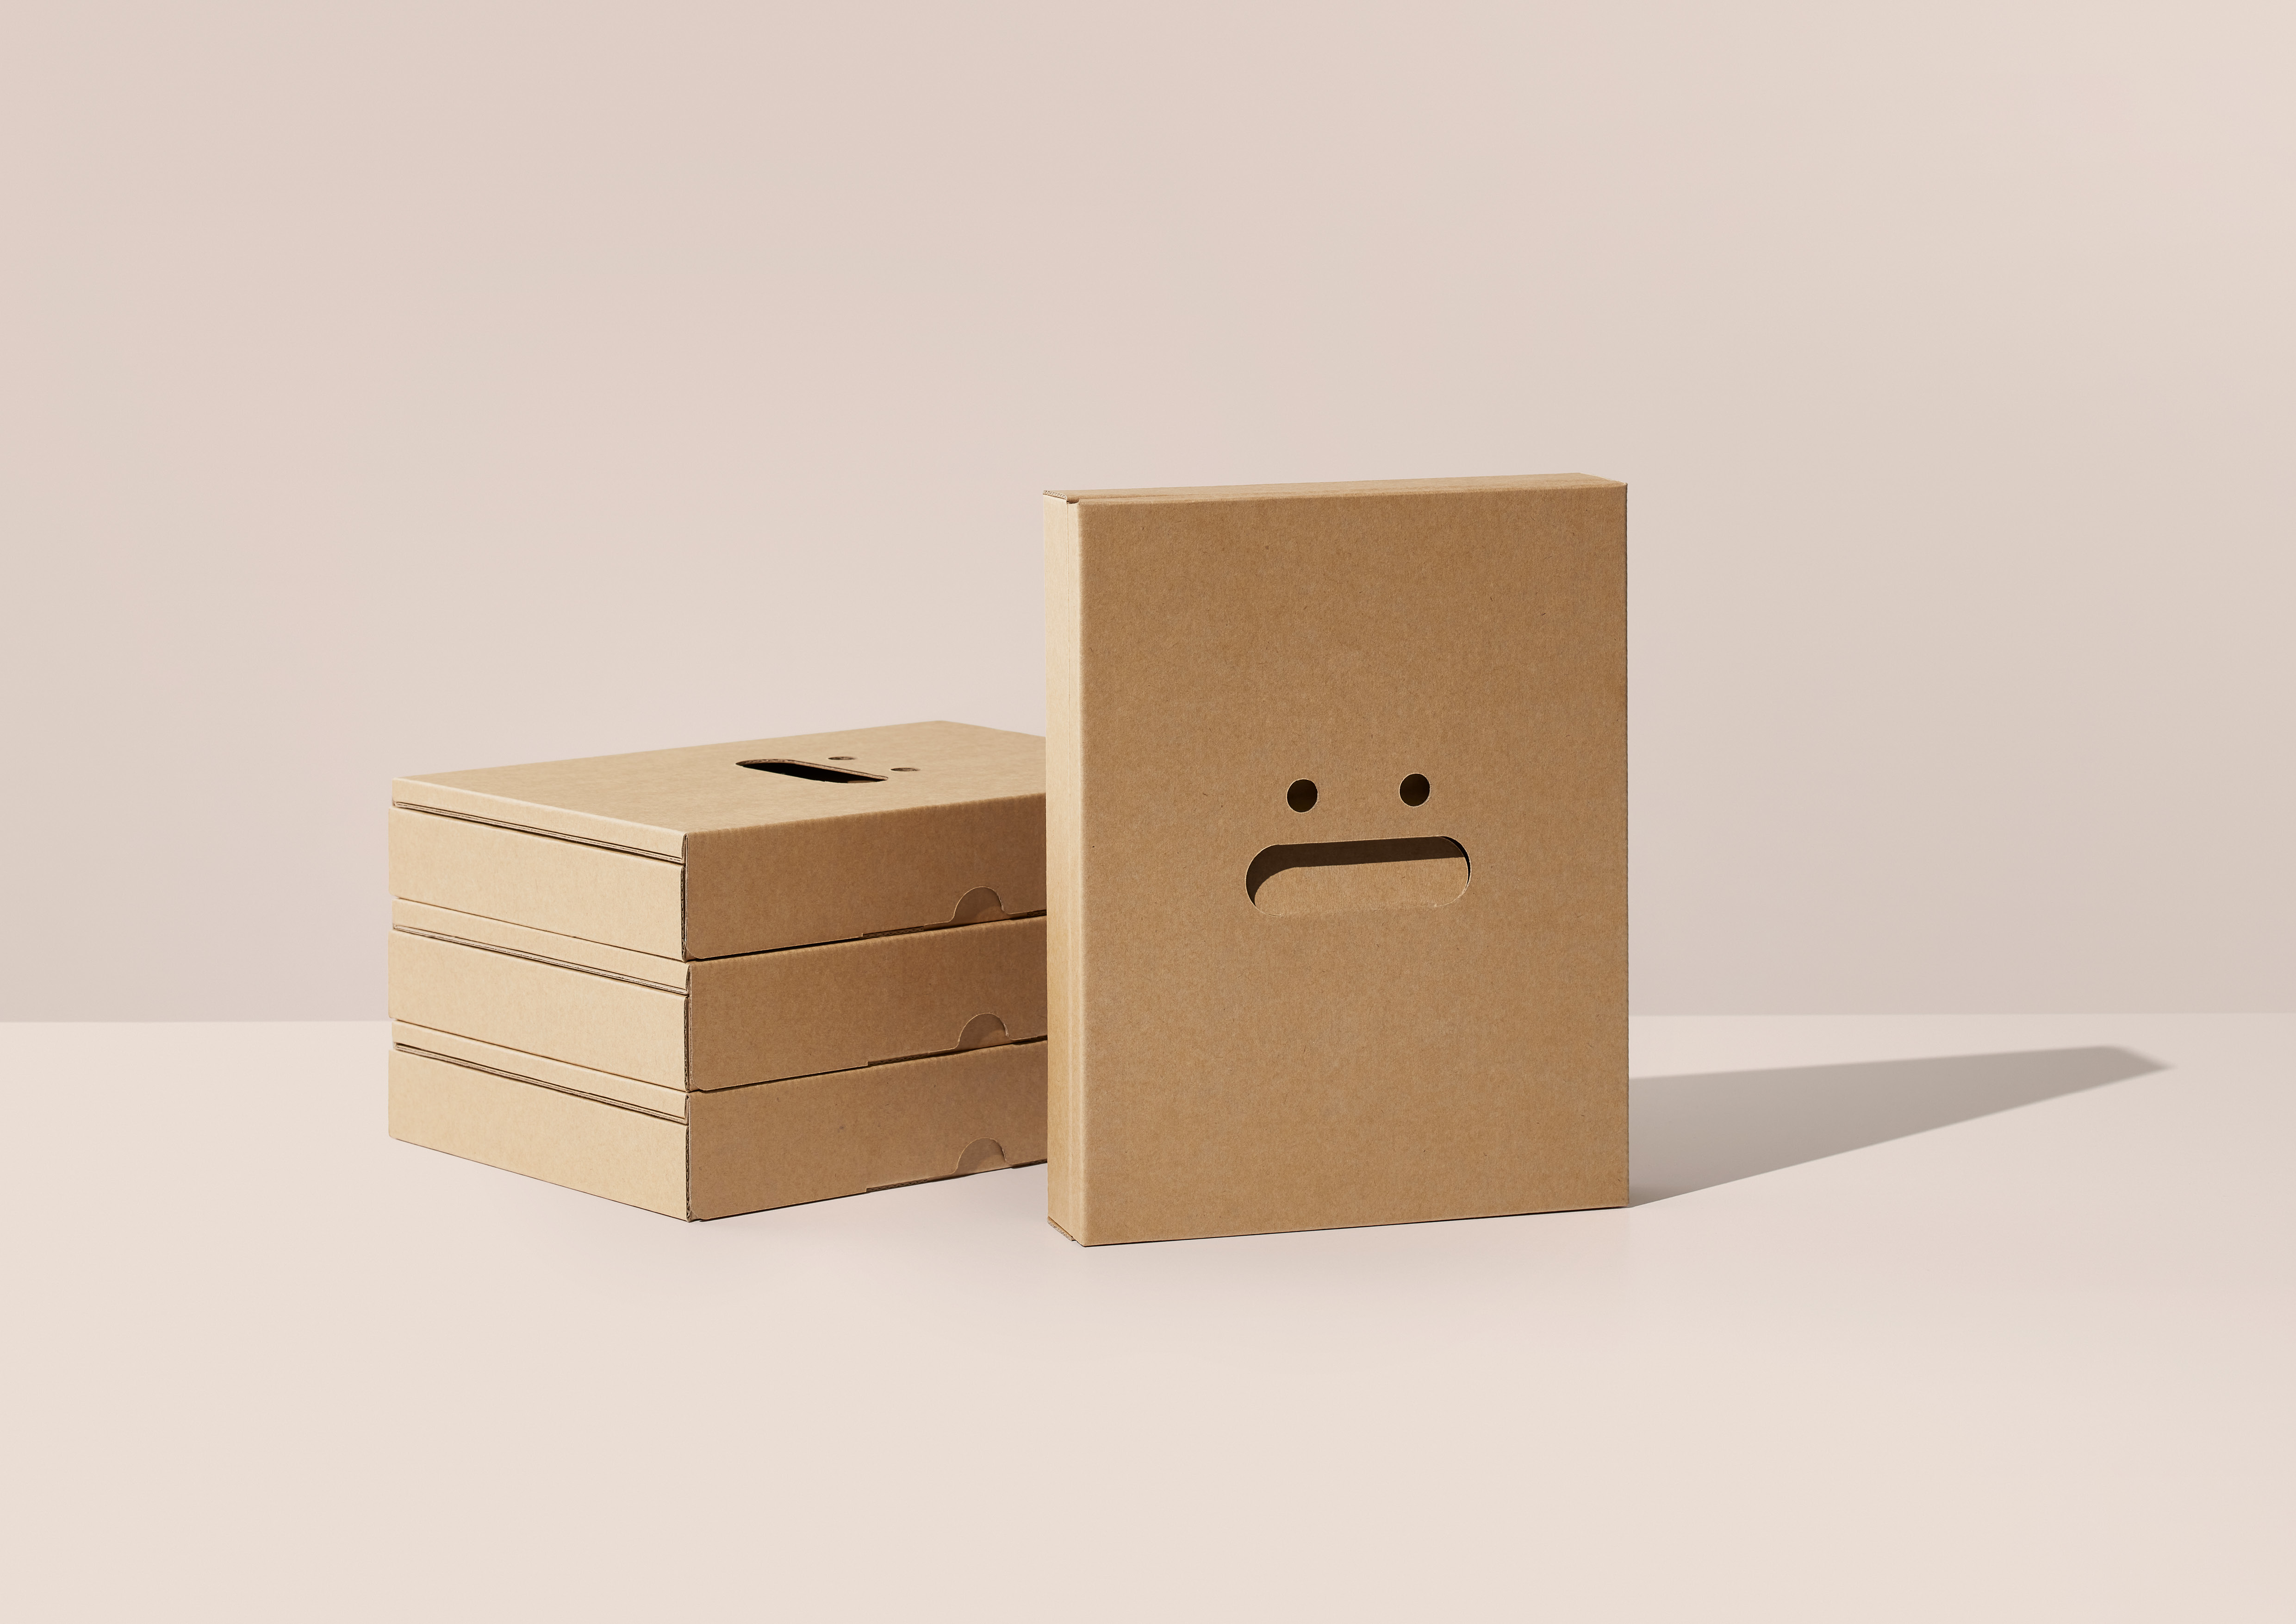 Packaging design and card boxes for Think Packaging by Seachange